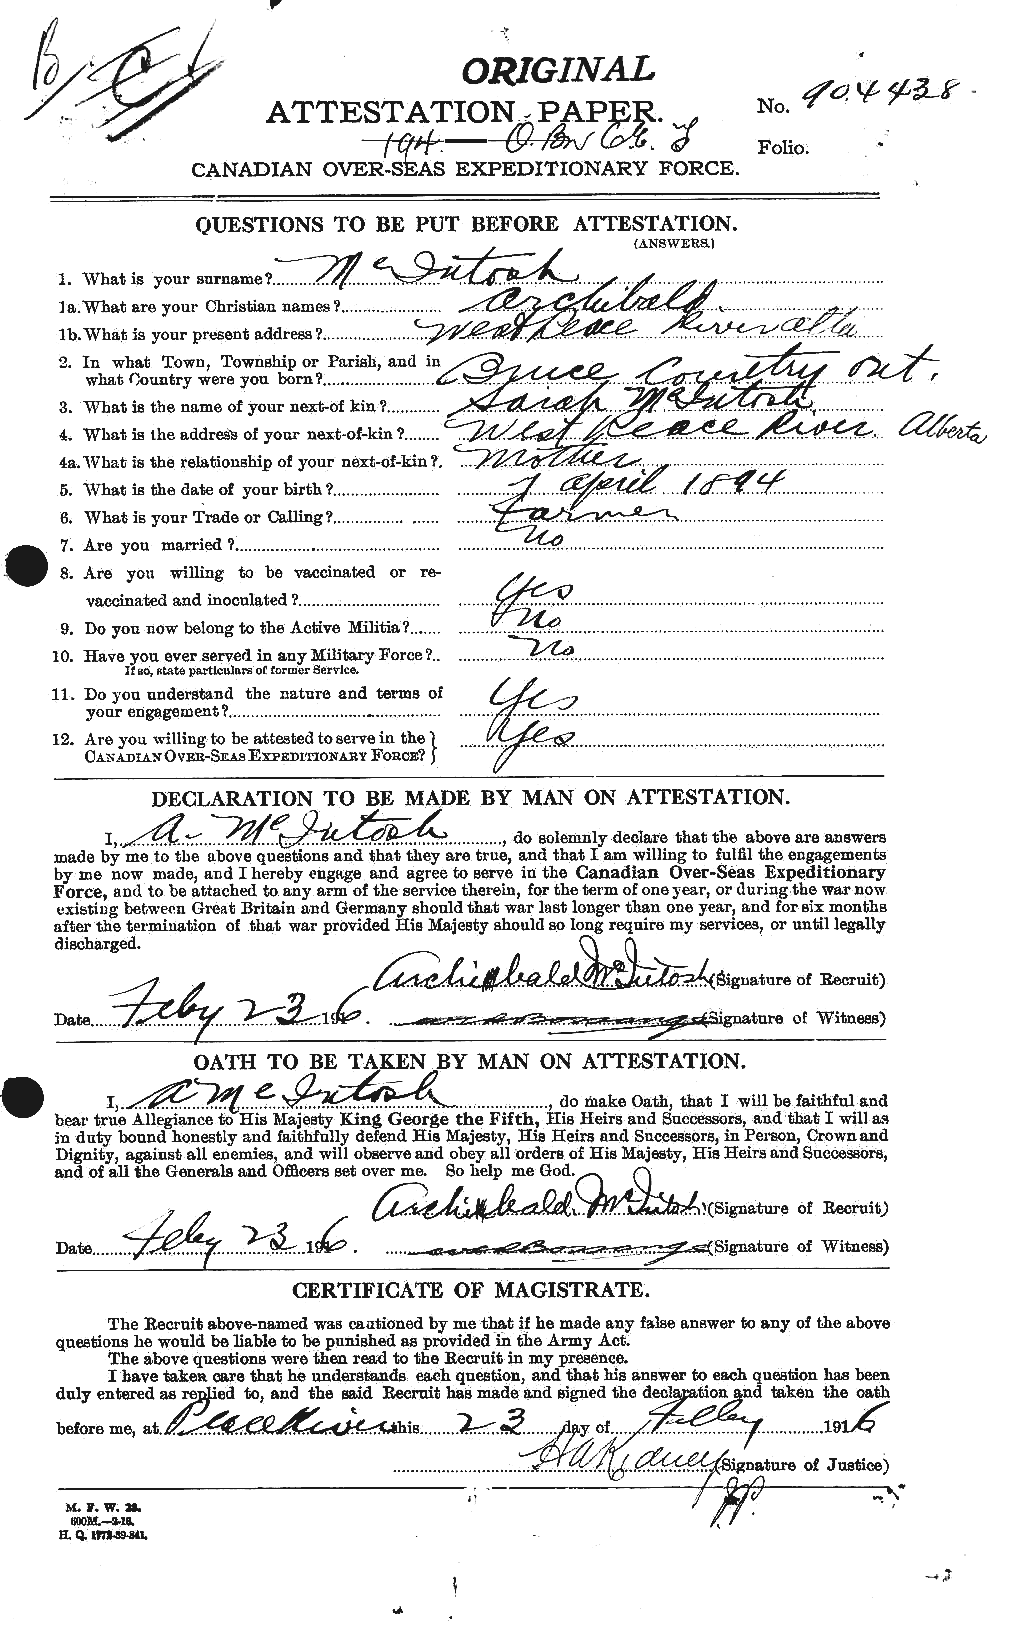 Personnel Records of the First World War - CEF 525581a